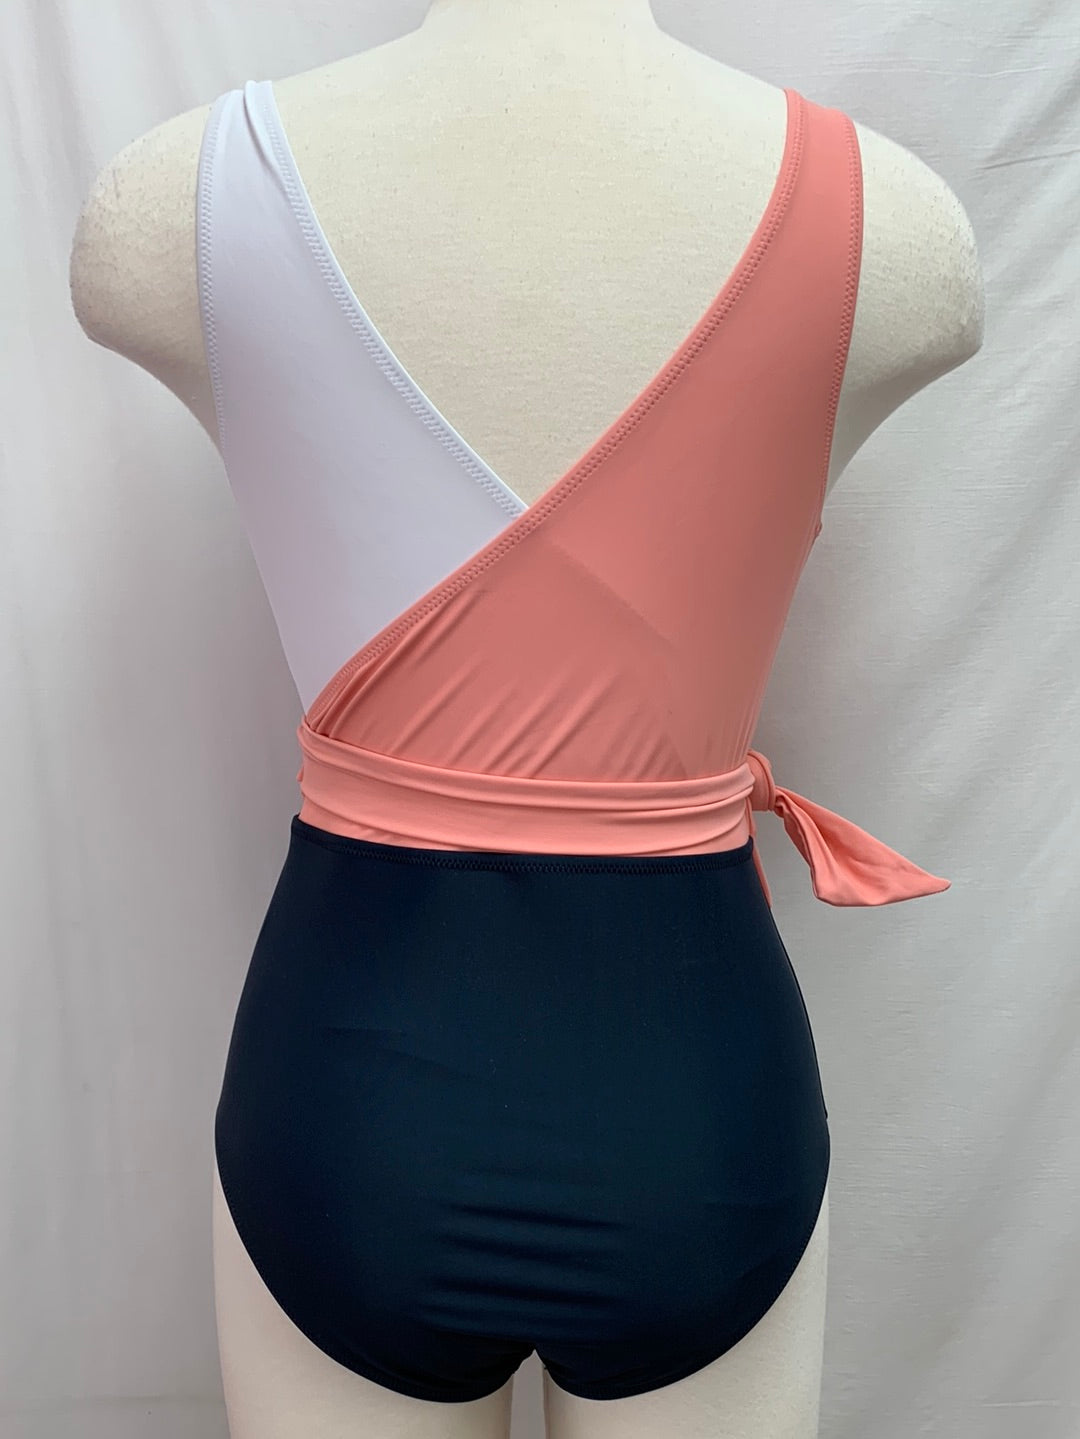 NWT - CUPSHE pink white navy V-Neck One Piece Swimsuit - L